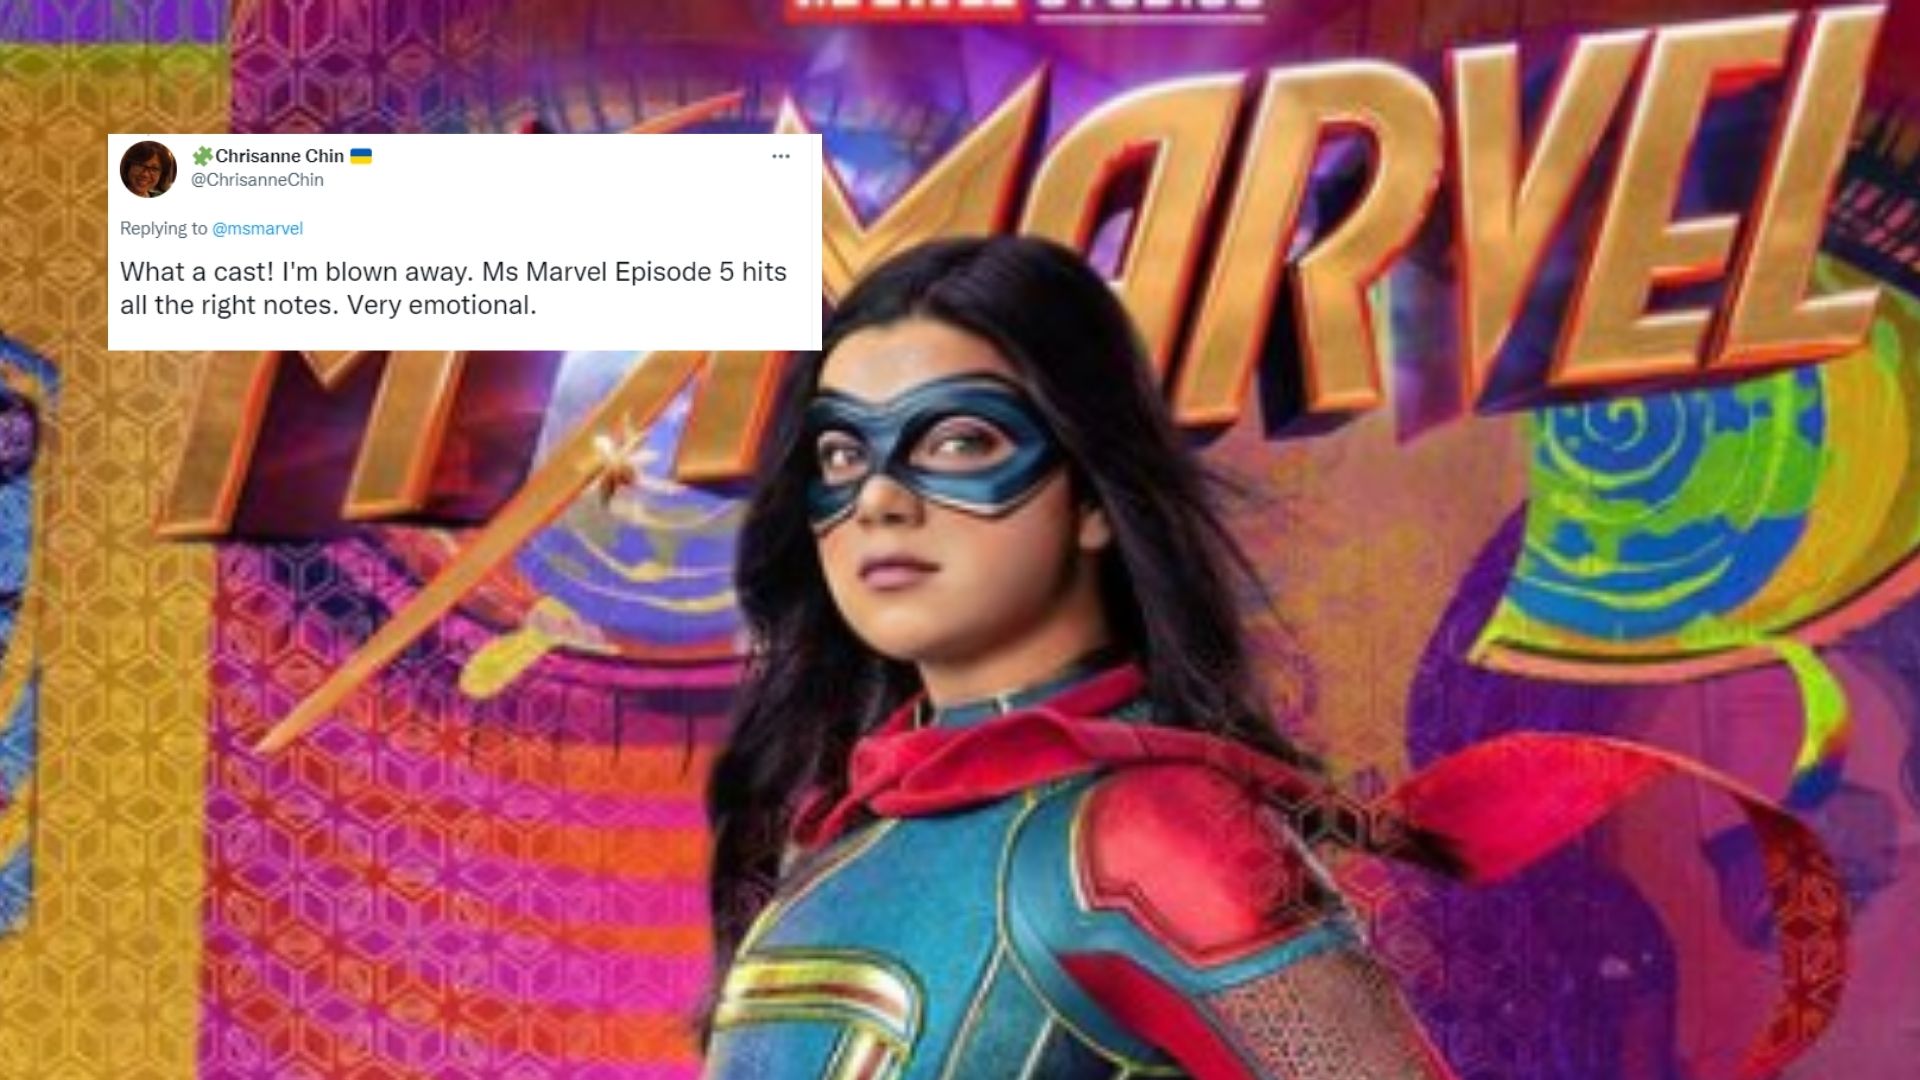 ‘Ms. Marvel’ Episode 5 Twitter Review- Twitterati Hail The Historically Rich Storyline On Partition, Love Fawad Khan’s Cameo